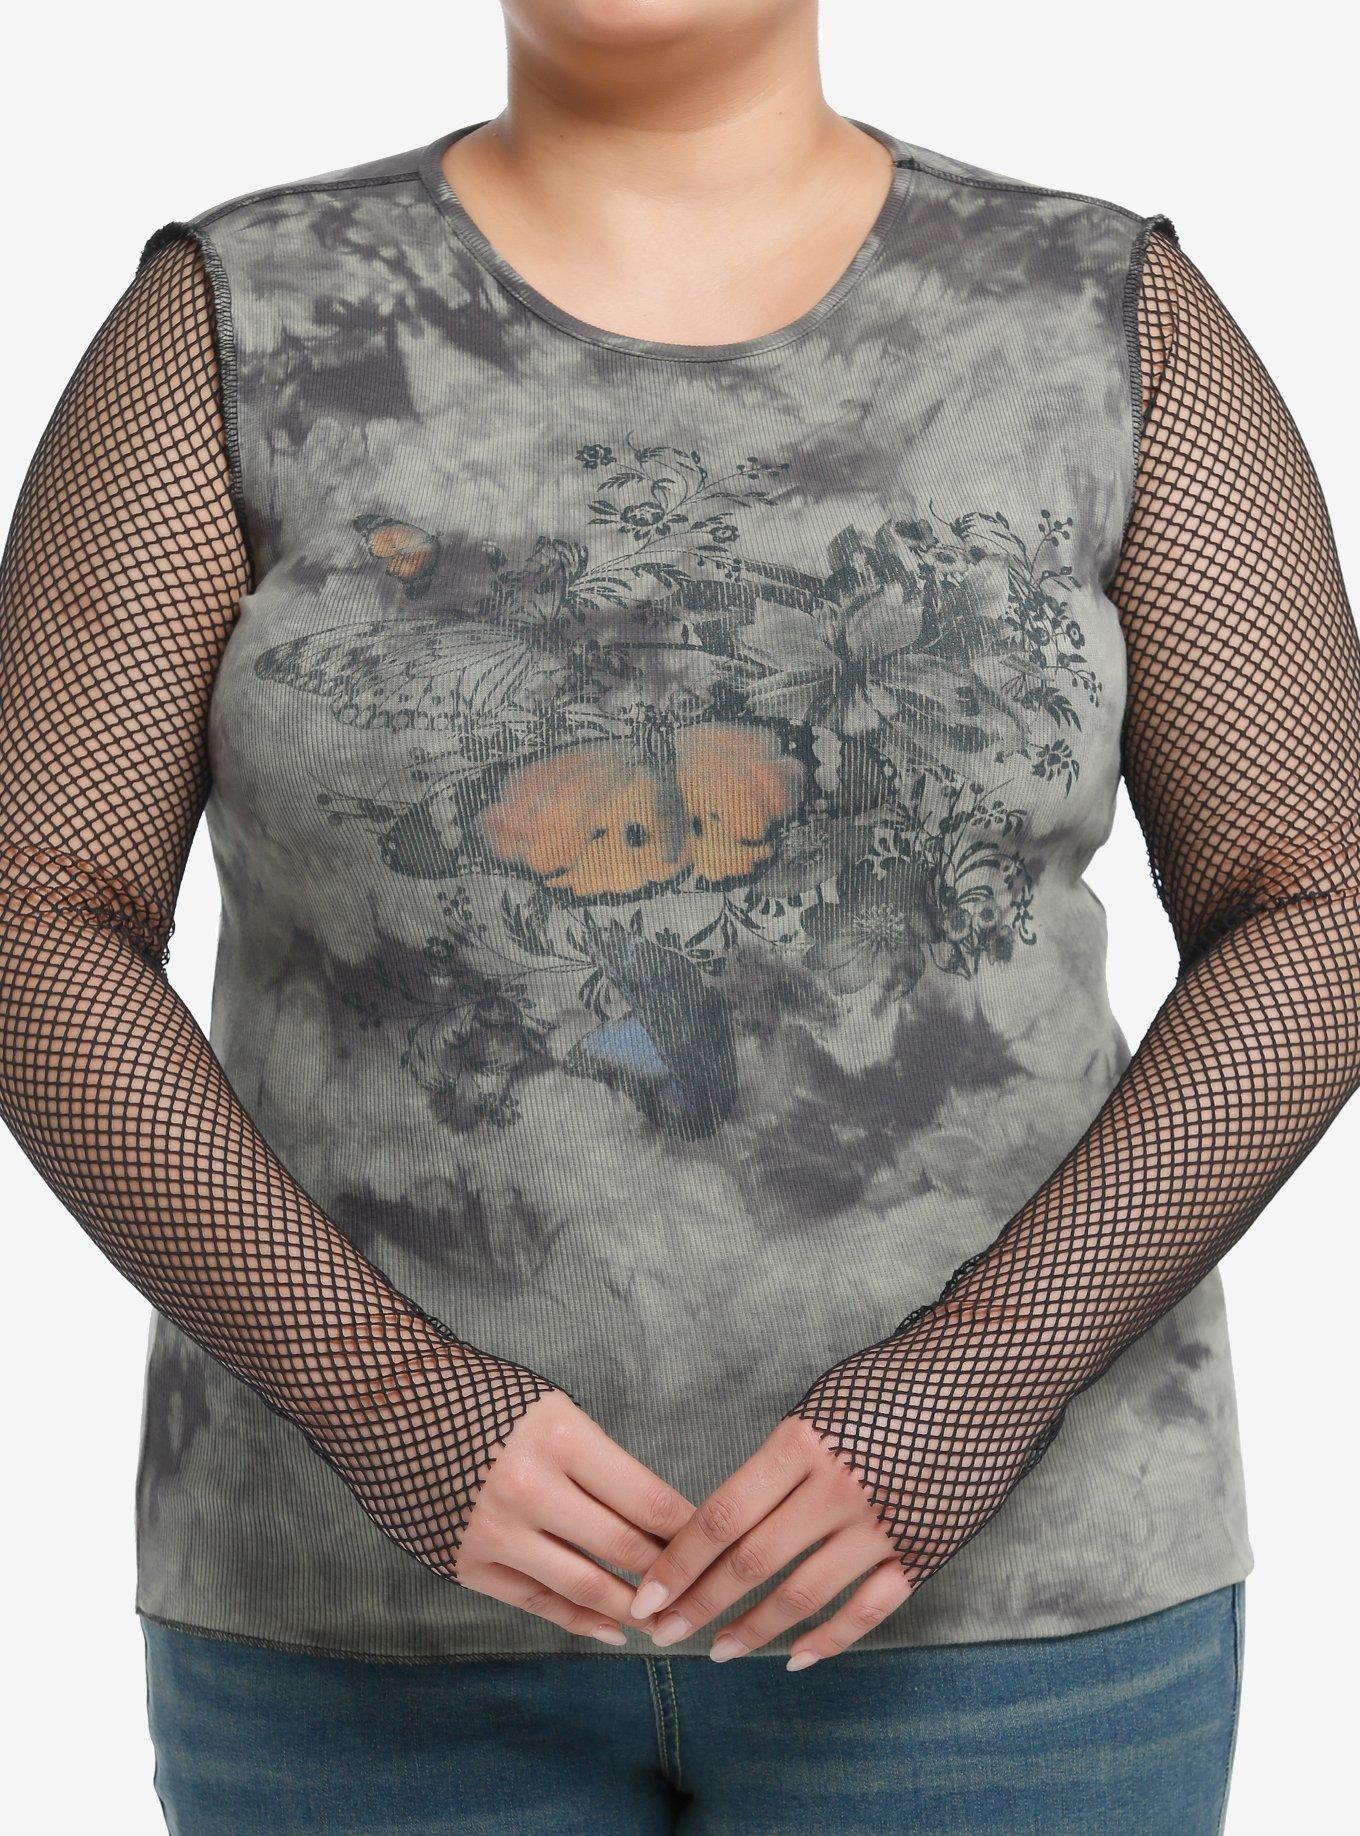 Thorn & Fable Grunge Butterfly Mesh Girls Long-Sleeve Top Plus Size